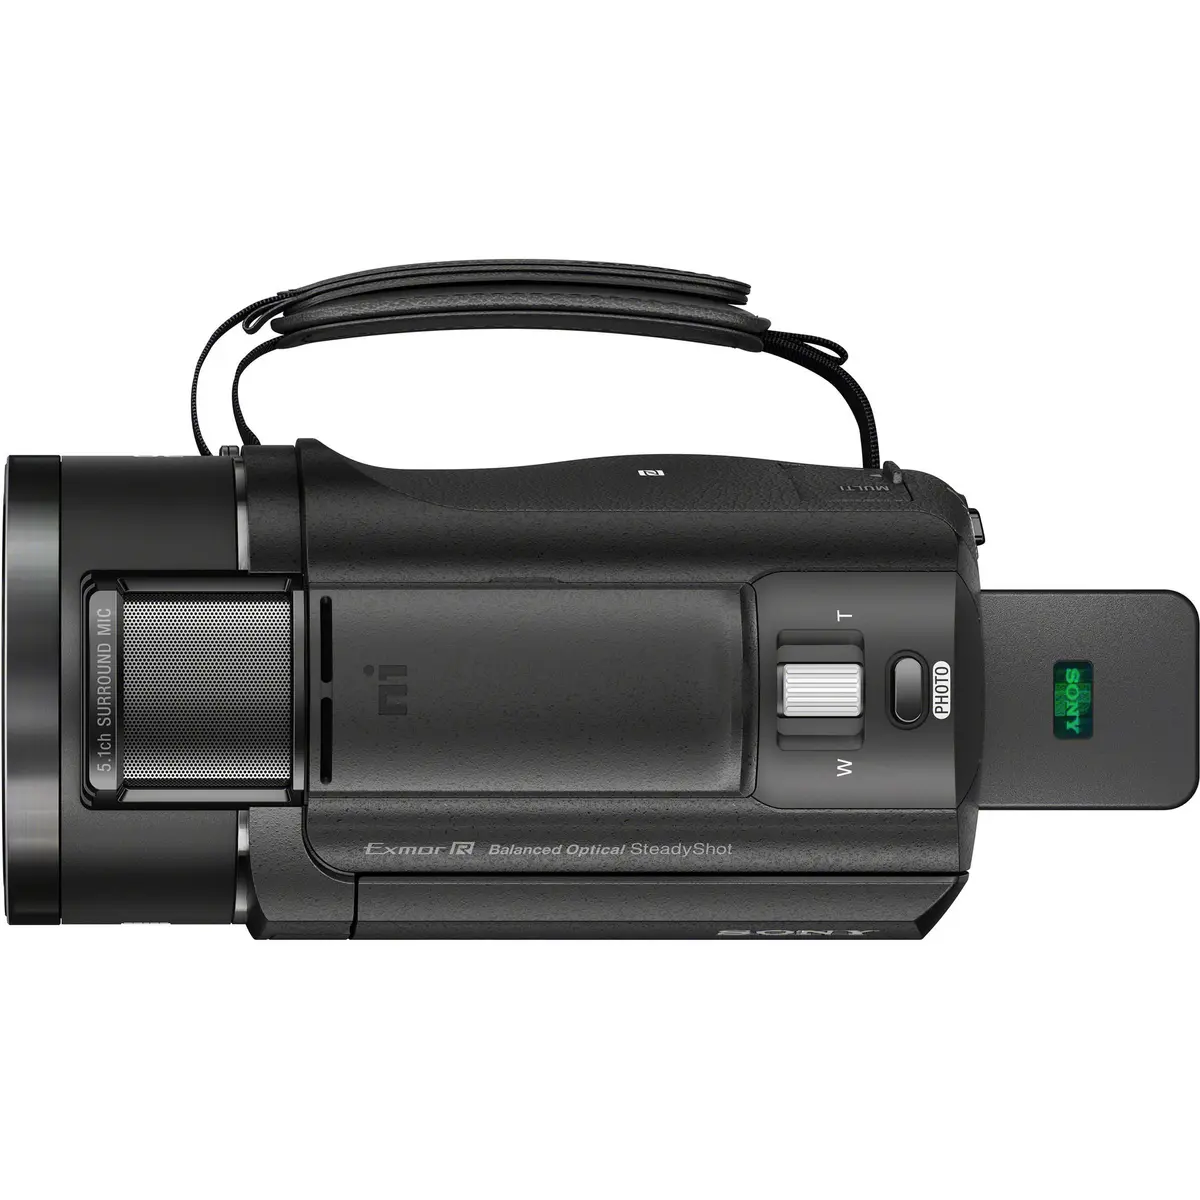 4. Sony FDR-AX43A Camcorder